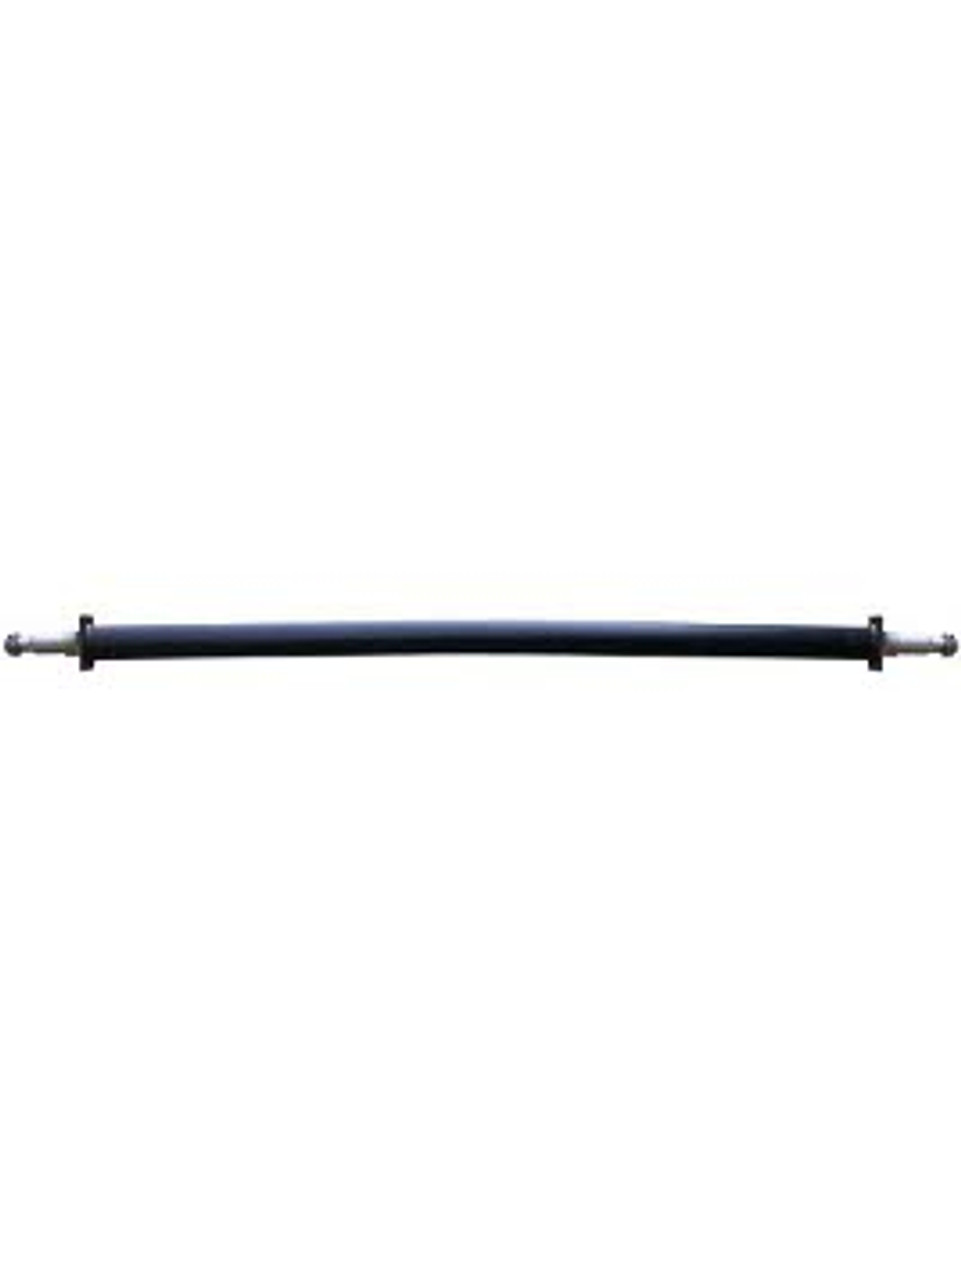 RT35865-84FC --- 2-3/8" Cambered Round Dexter Straight Axles  - 3,500 lb Capacity - 86.5" Hub Face